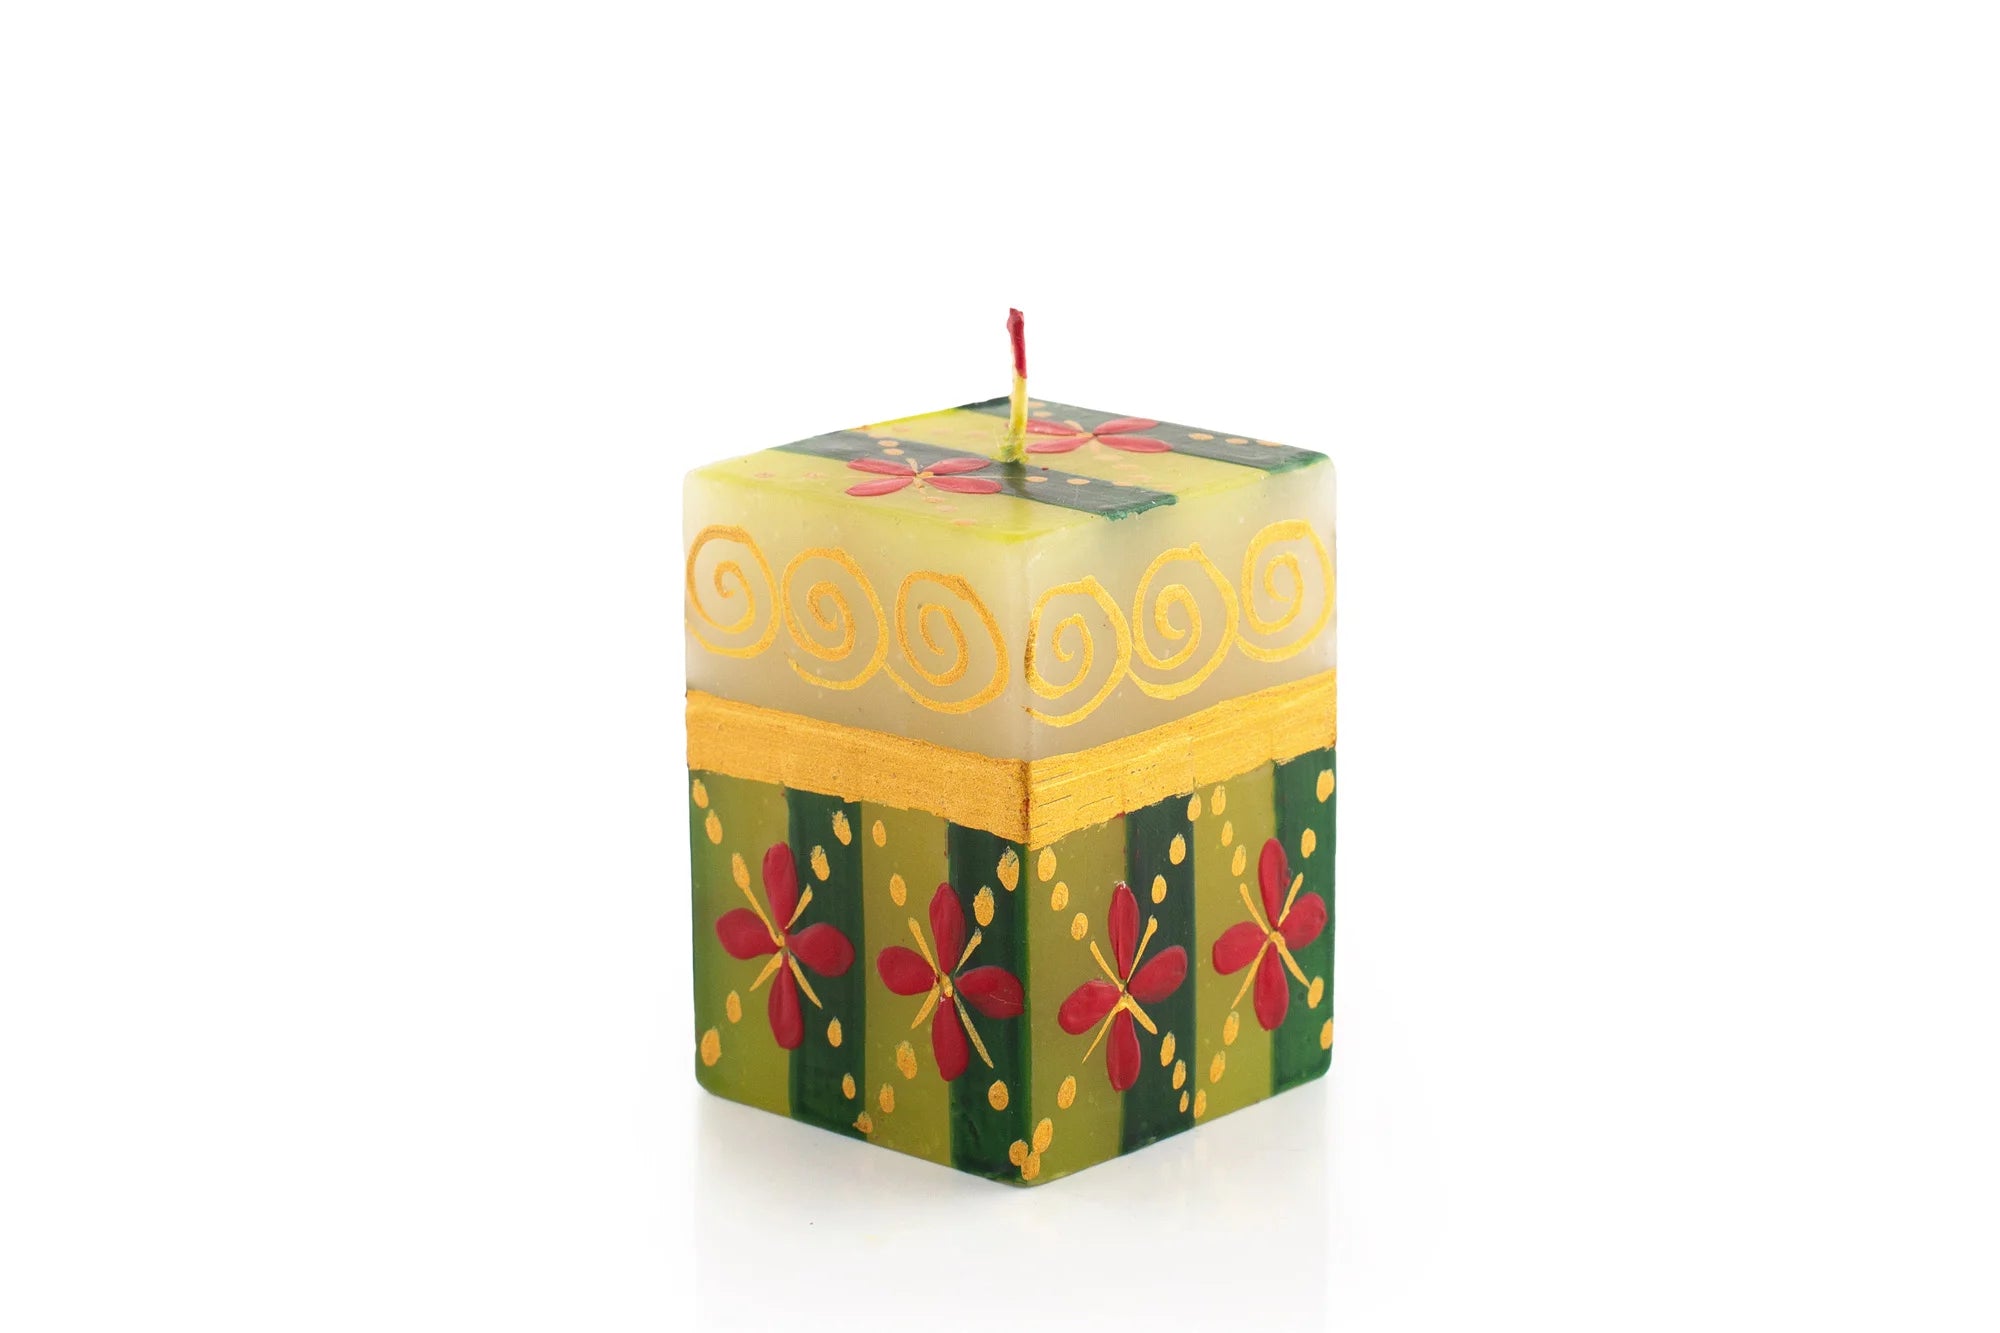 2" x 2" x 3" Christmas cube in various traditional Christmas patterns in red, dark green, light green and gold. This cube is painted with red Christmas flower on a lacy green & gold background.